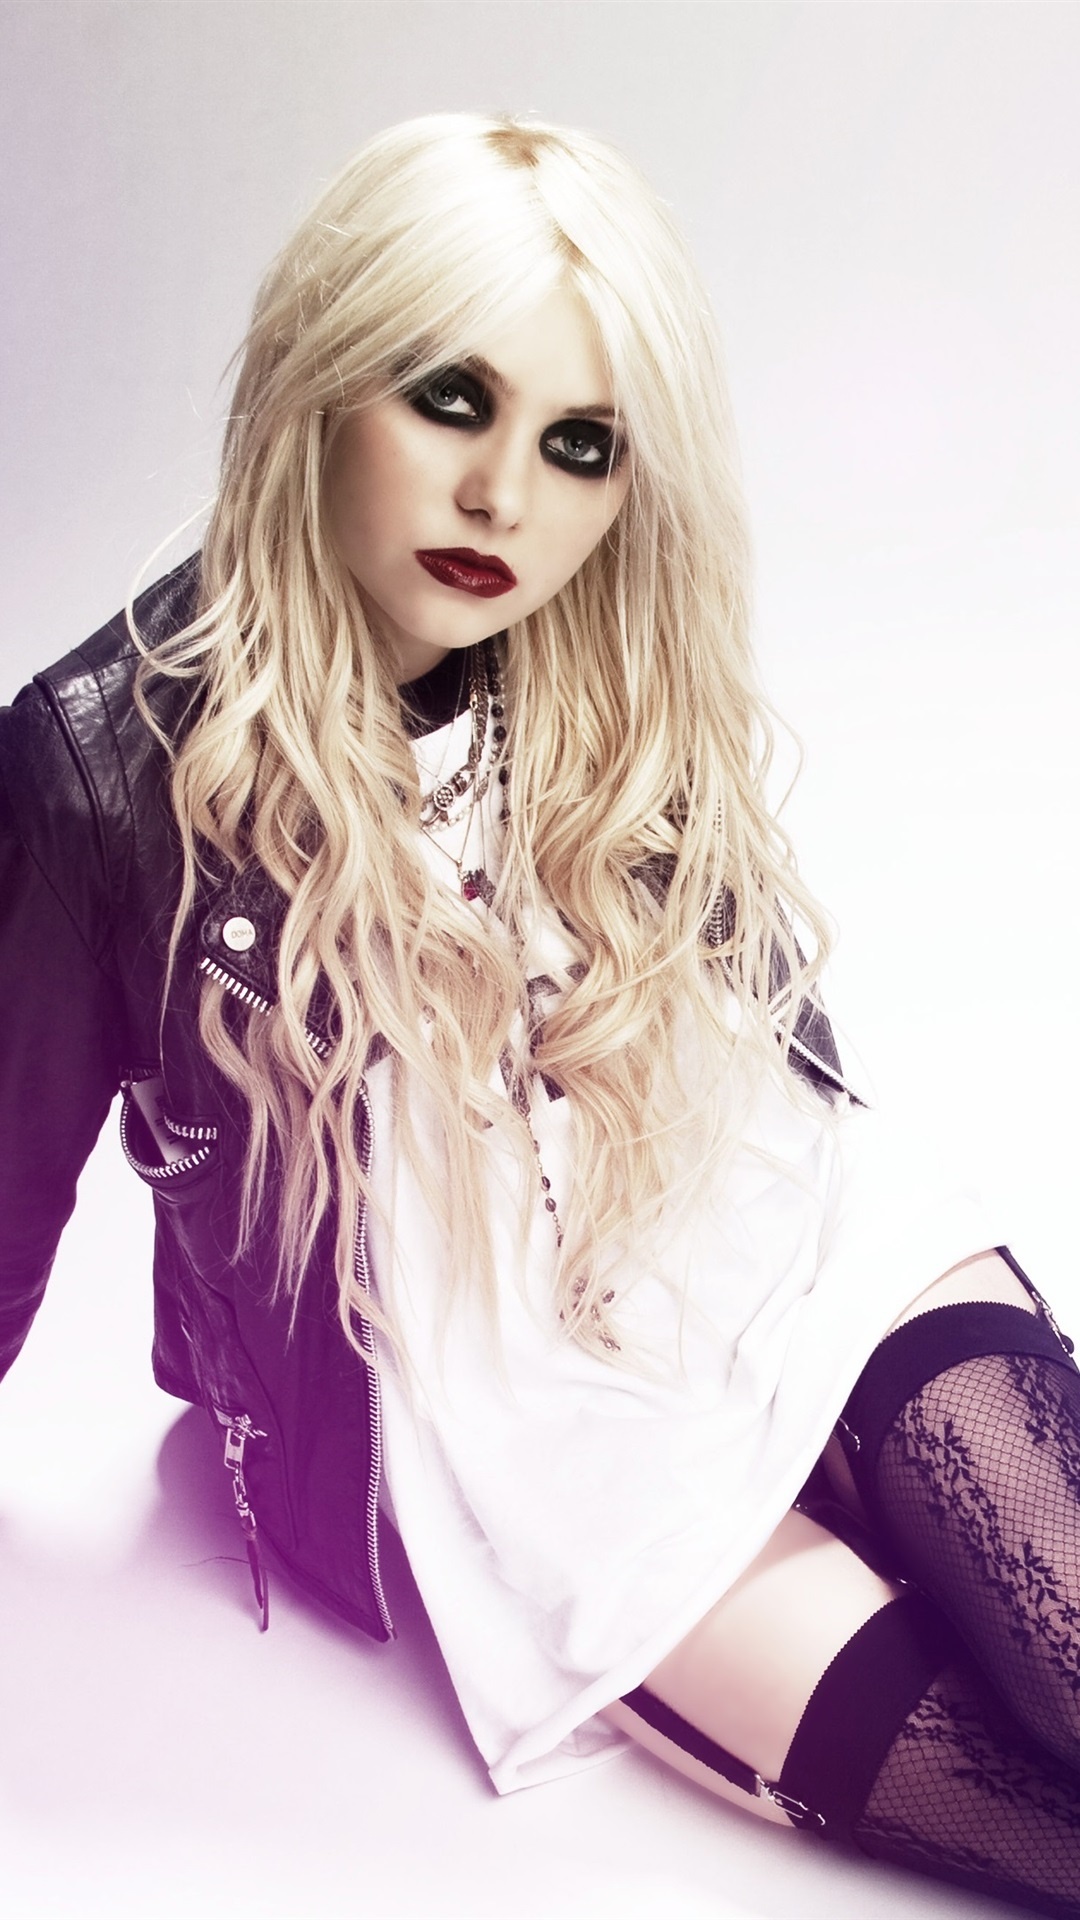 Taylor Momsen phone wallpapers, Ryan Sellers, The Pretty Reckless, Taylor Momsen, 1080x1920 Full HD Handy